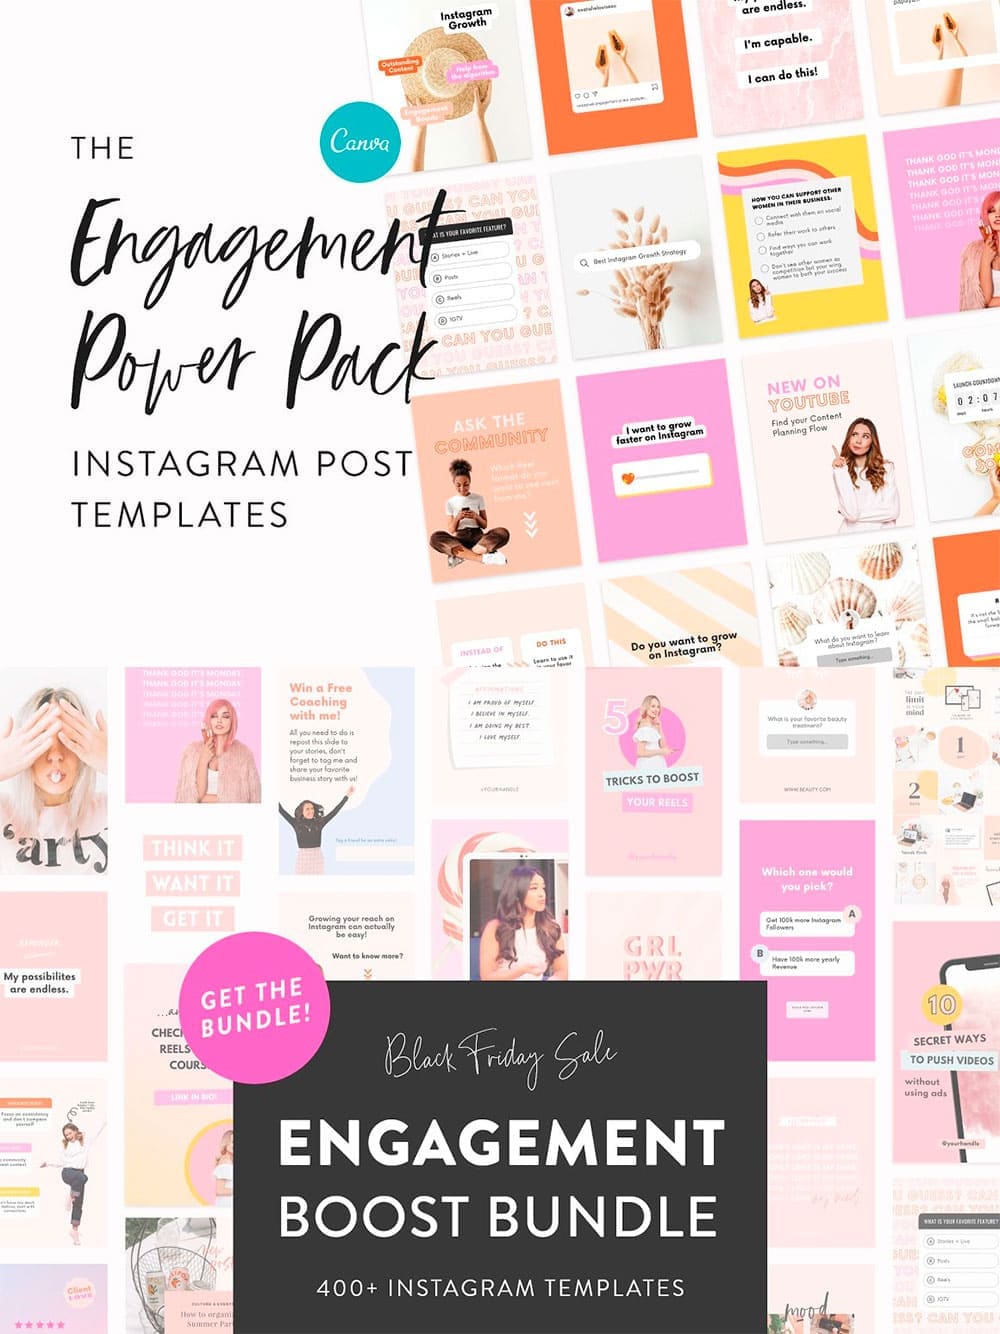 Instagram engagement posts template, picture for pinterest 1000x1334.